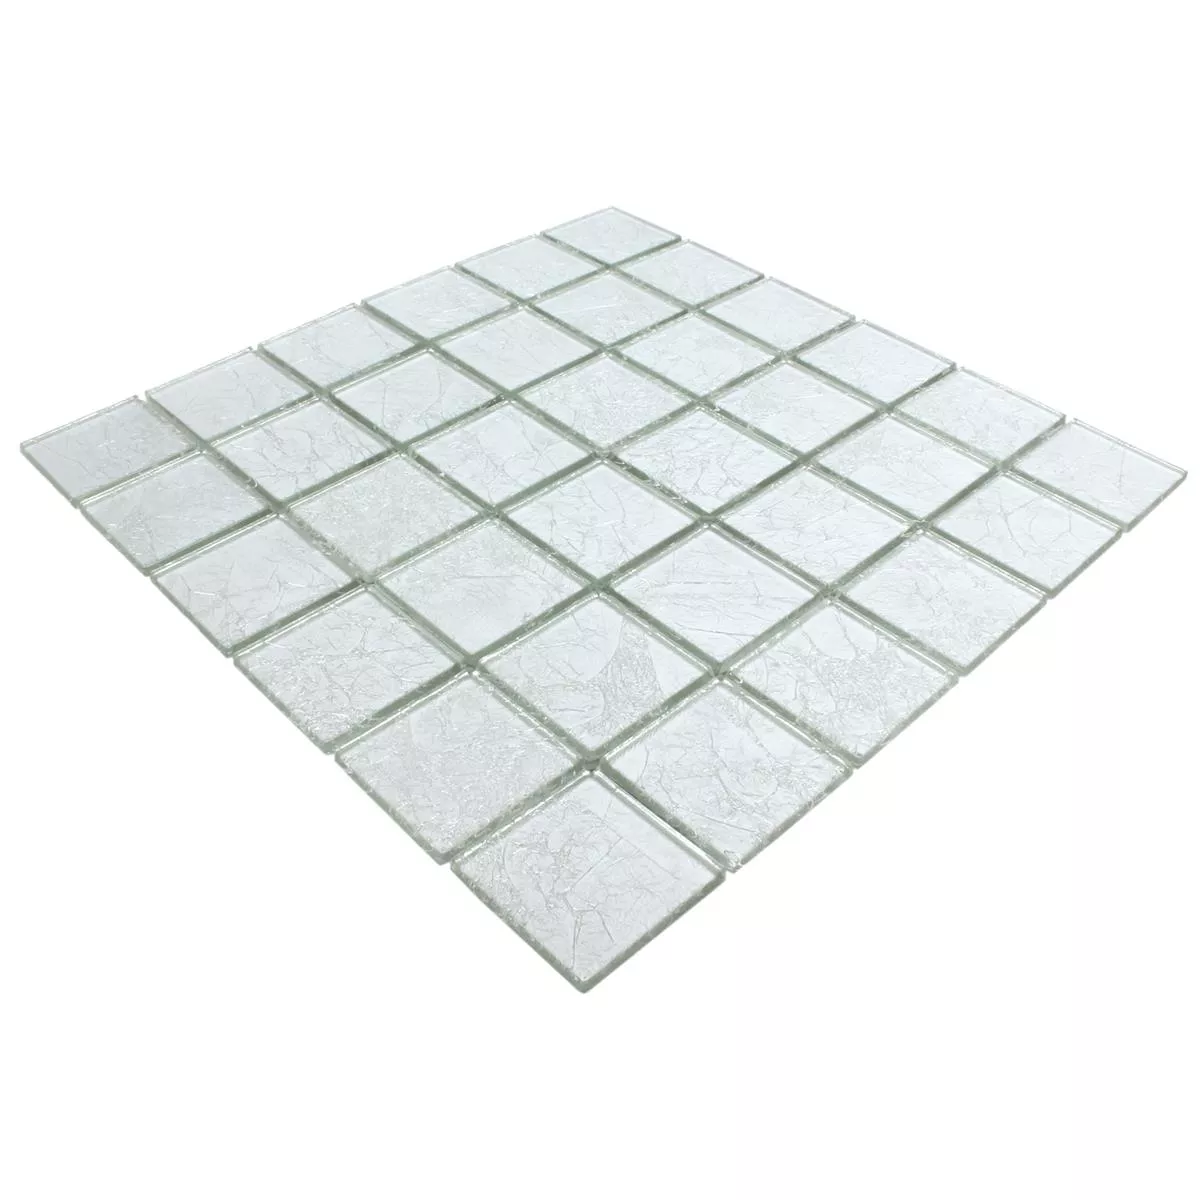 Mosaik Glas Lucca Silver 48x48x4mm